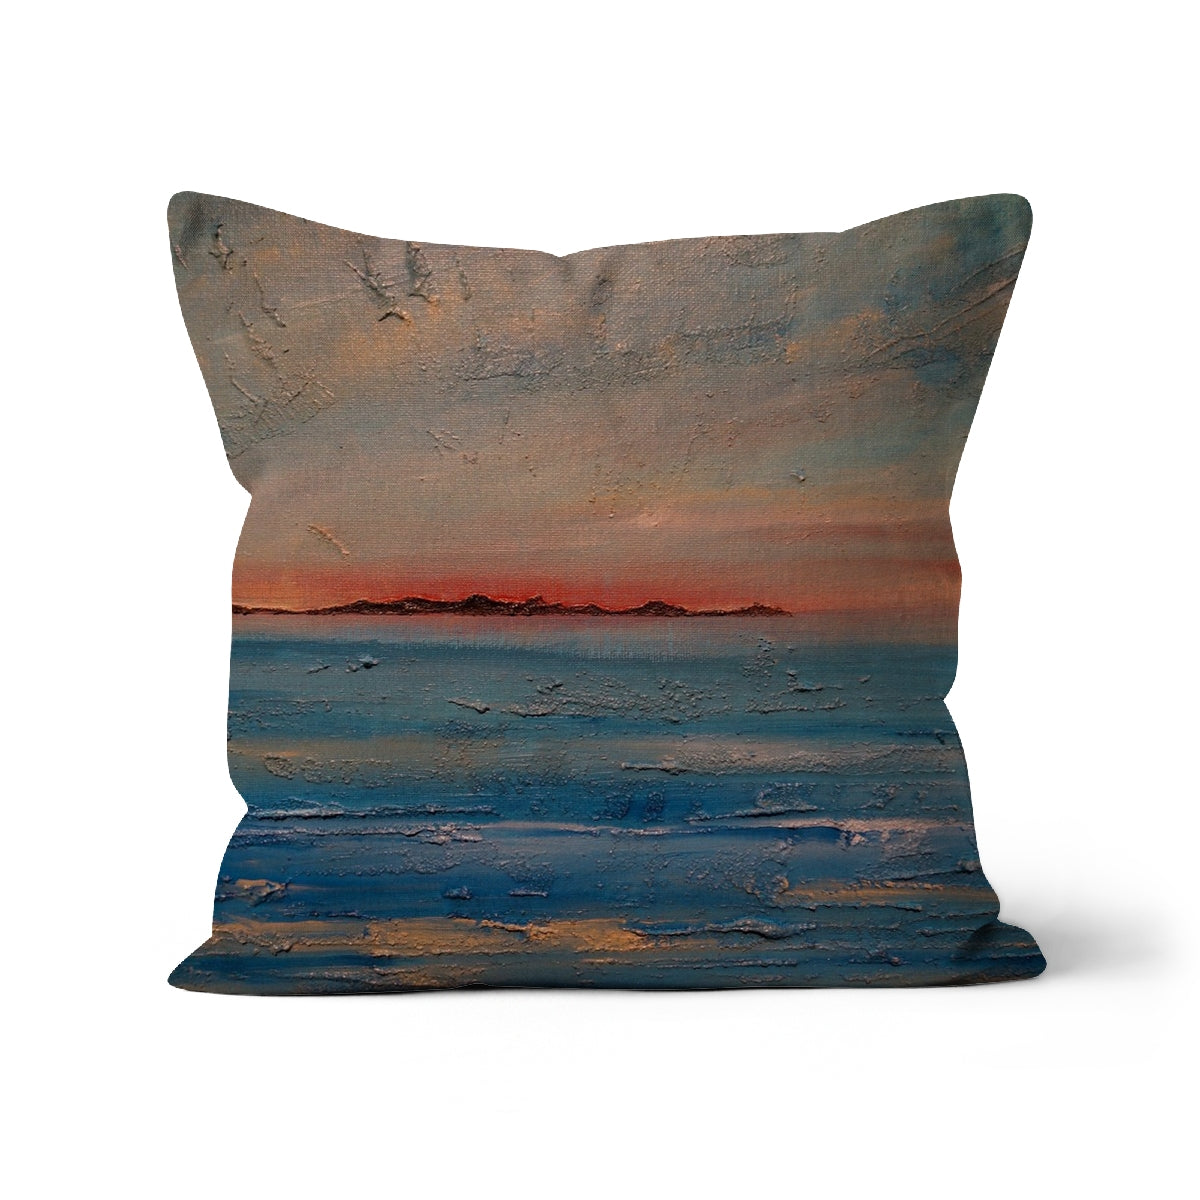 Gigha Sunset Art Gifts Cushion-Cushions-Hebridean Islands Art Gallery-Canvas-24"x24"-Paintings, Prints, Homeware, Art Gifts From Scotland By Scottish Artist Kevin Hunter